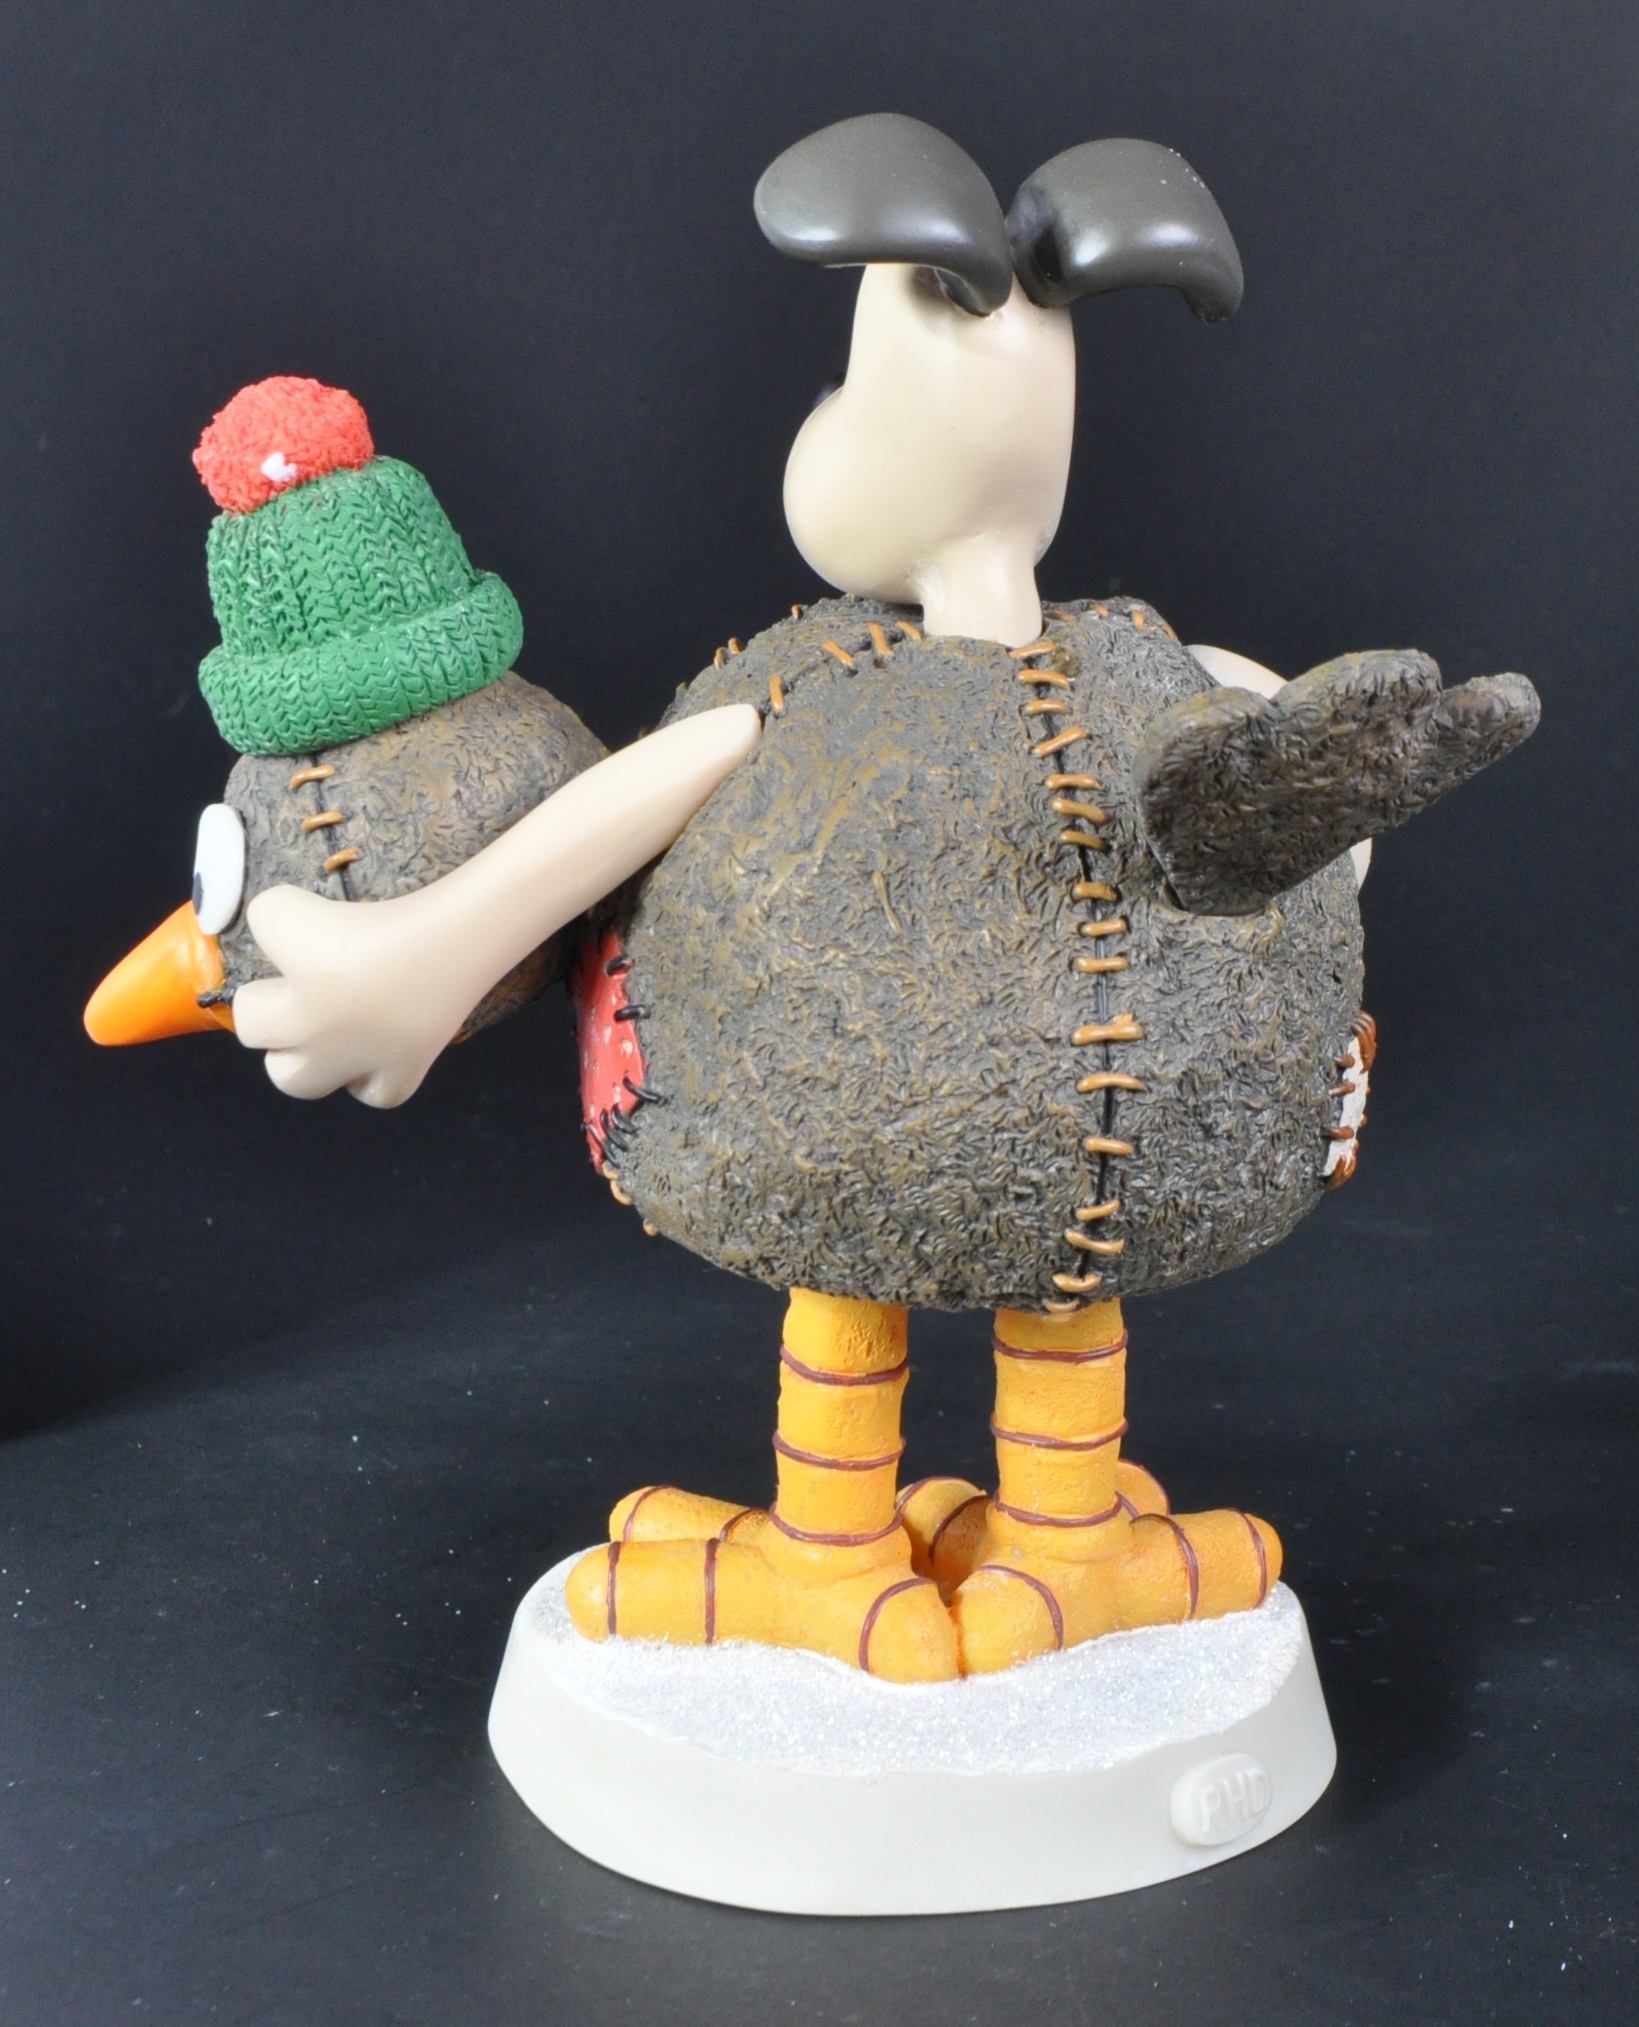 WALLACE & GROMIT - ROBERT HARROP - LIMITED EDITION FIGURINE - Image 3 of 5